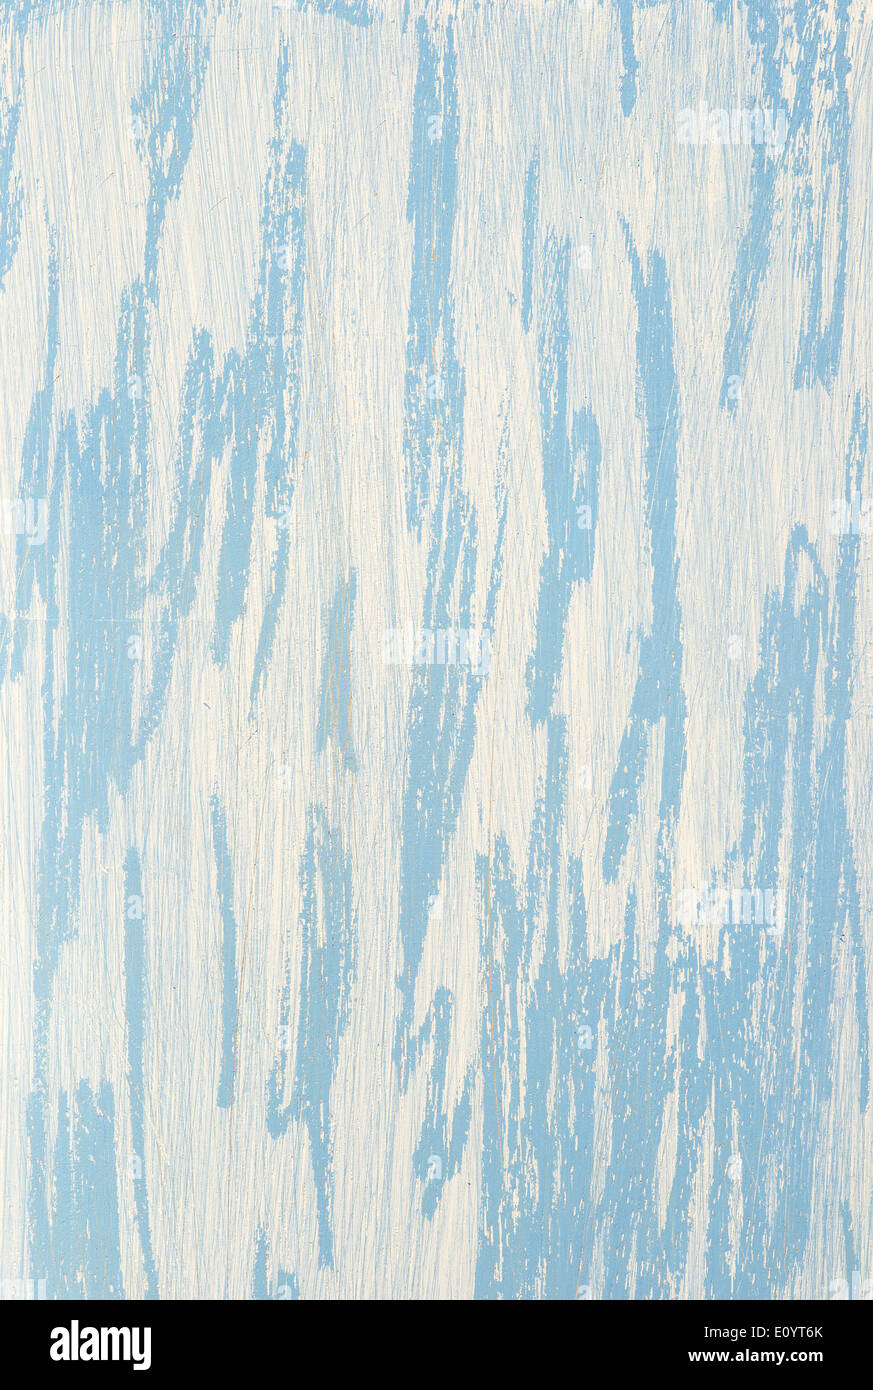 Light blue and white wooden background, vertical Stock Photo